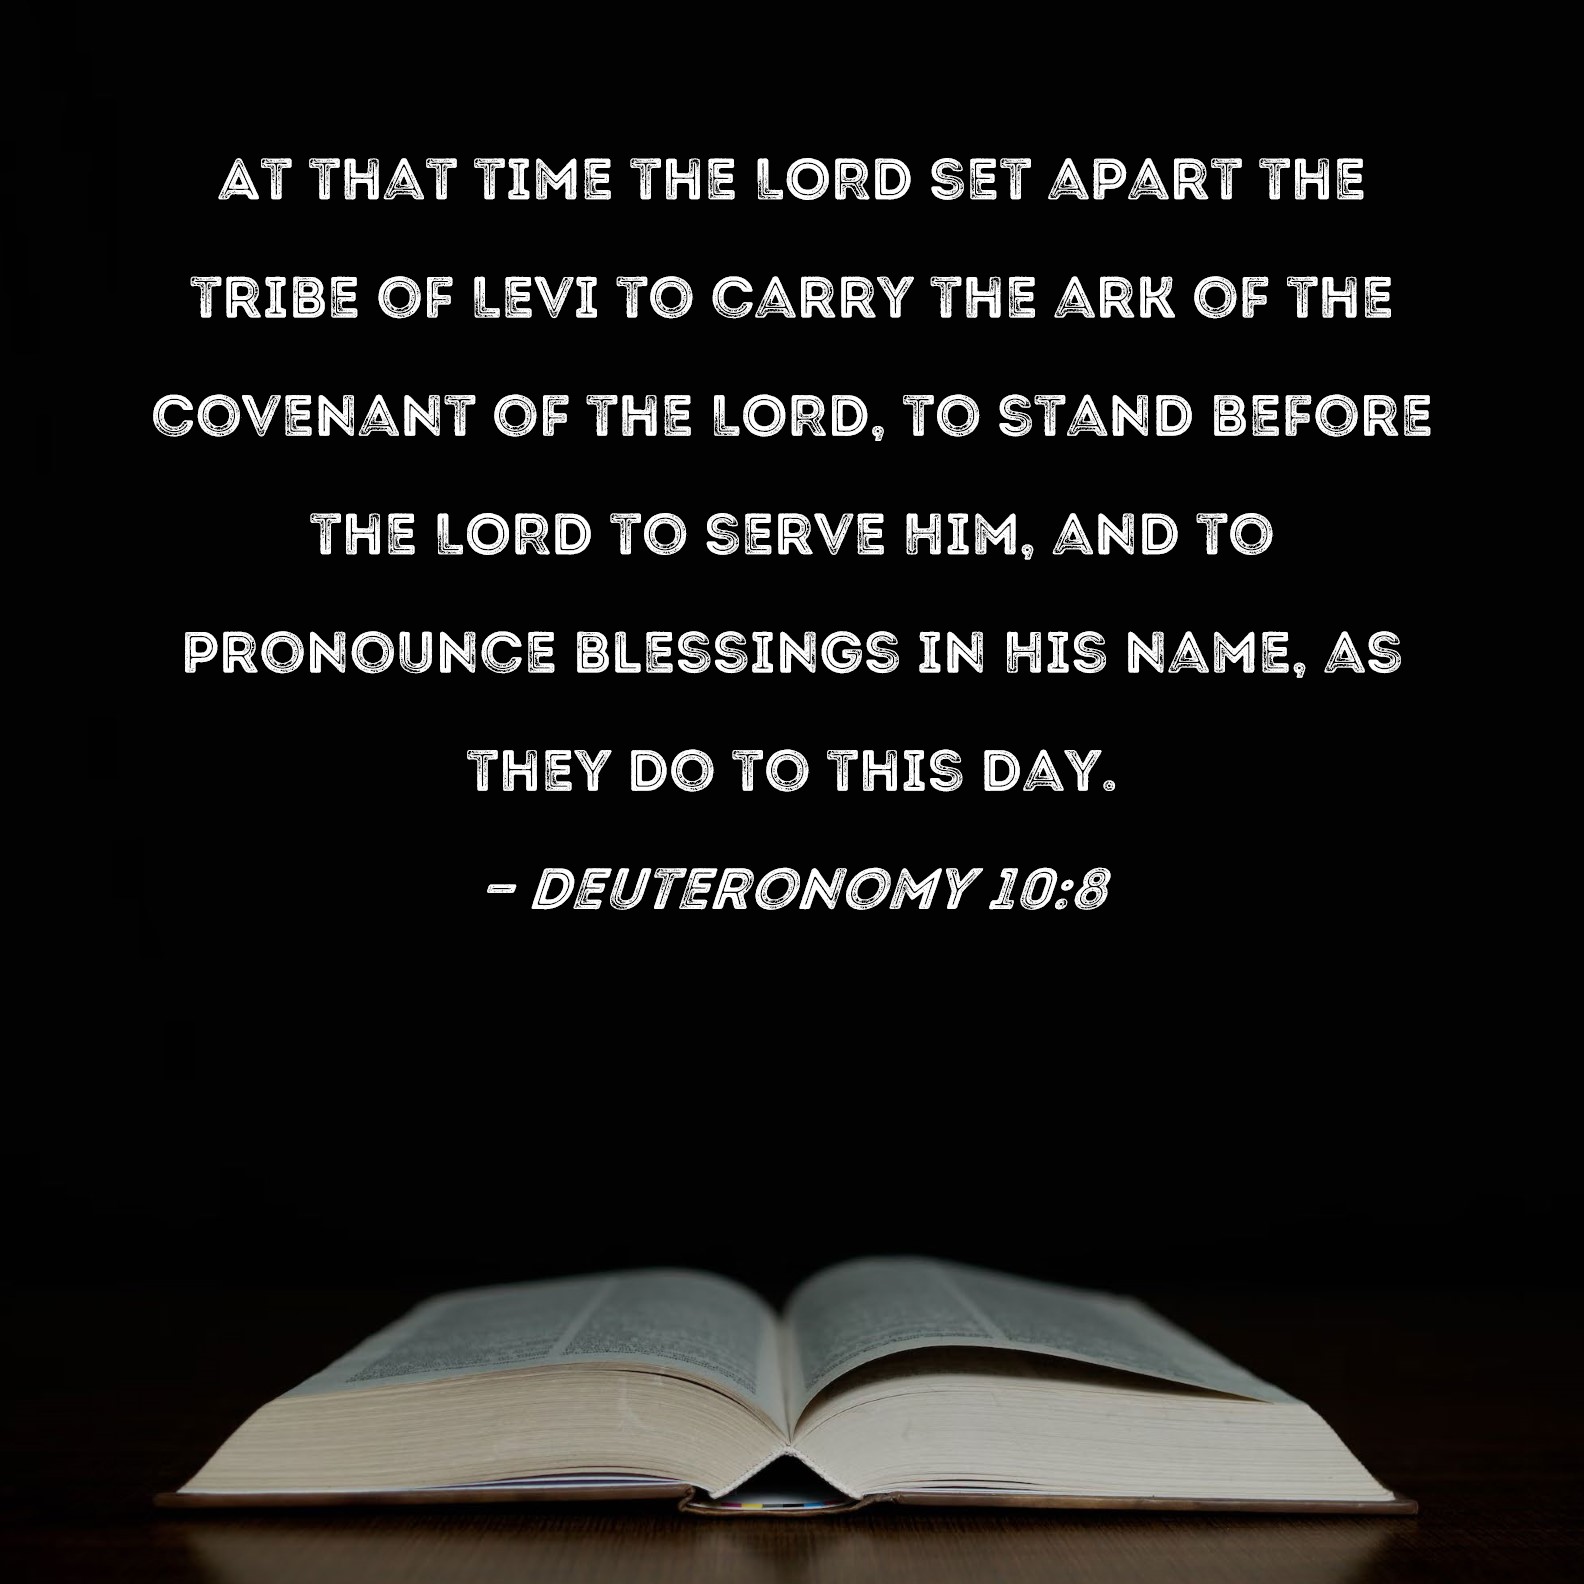 Deuteronomy 10:8 At that time the LORD set apart the tribe of Levi to carry  the ark of the covenant of the LORD, to stand before the LORD to serve Him,  and